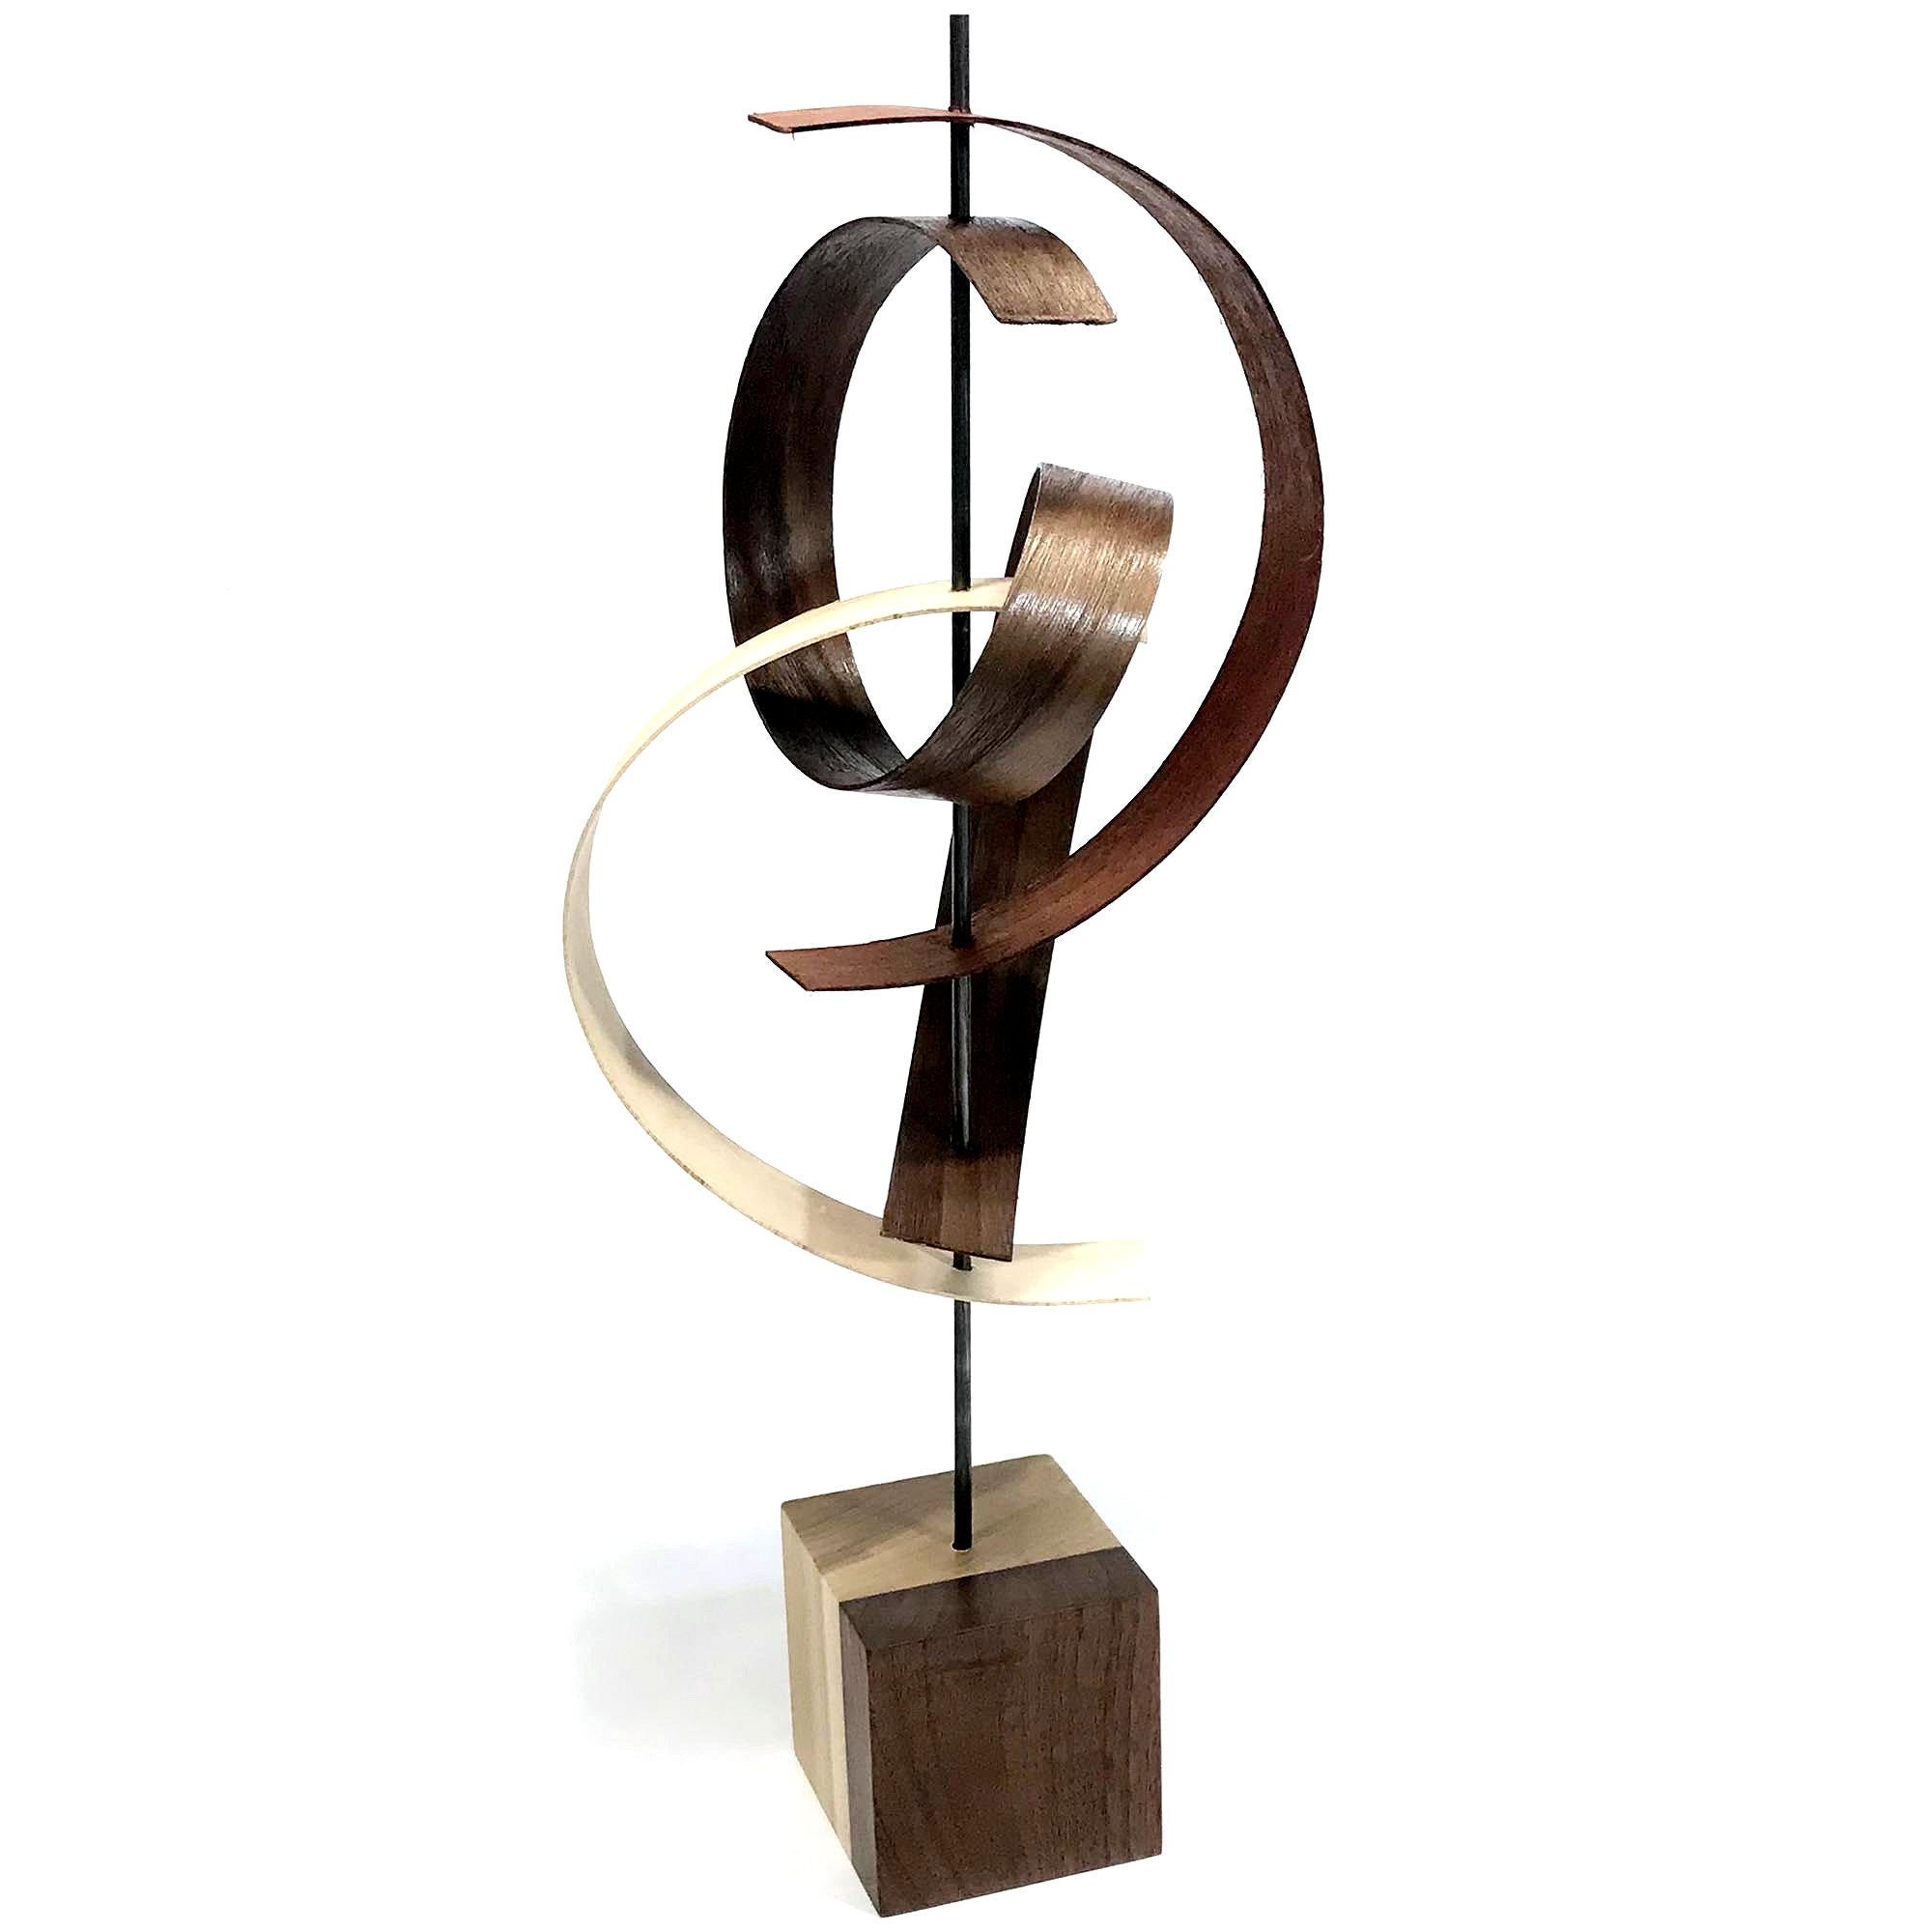 Description:  This sculpture consists of formed black walnut, mahogany, and hickory. Black walnut/poplar base. This sculpture is an open-edition multiple original; hand-made by the artist.
Title: Swing

Artist Bio:
Jeff was born and raised in Toledo